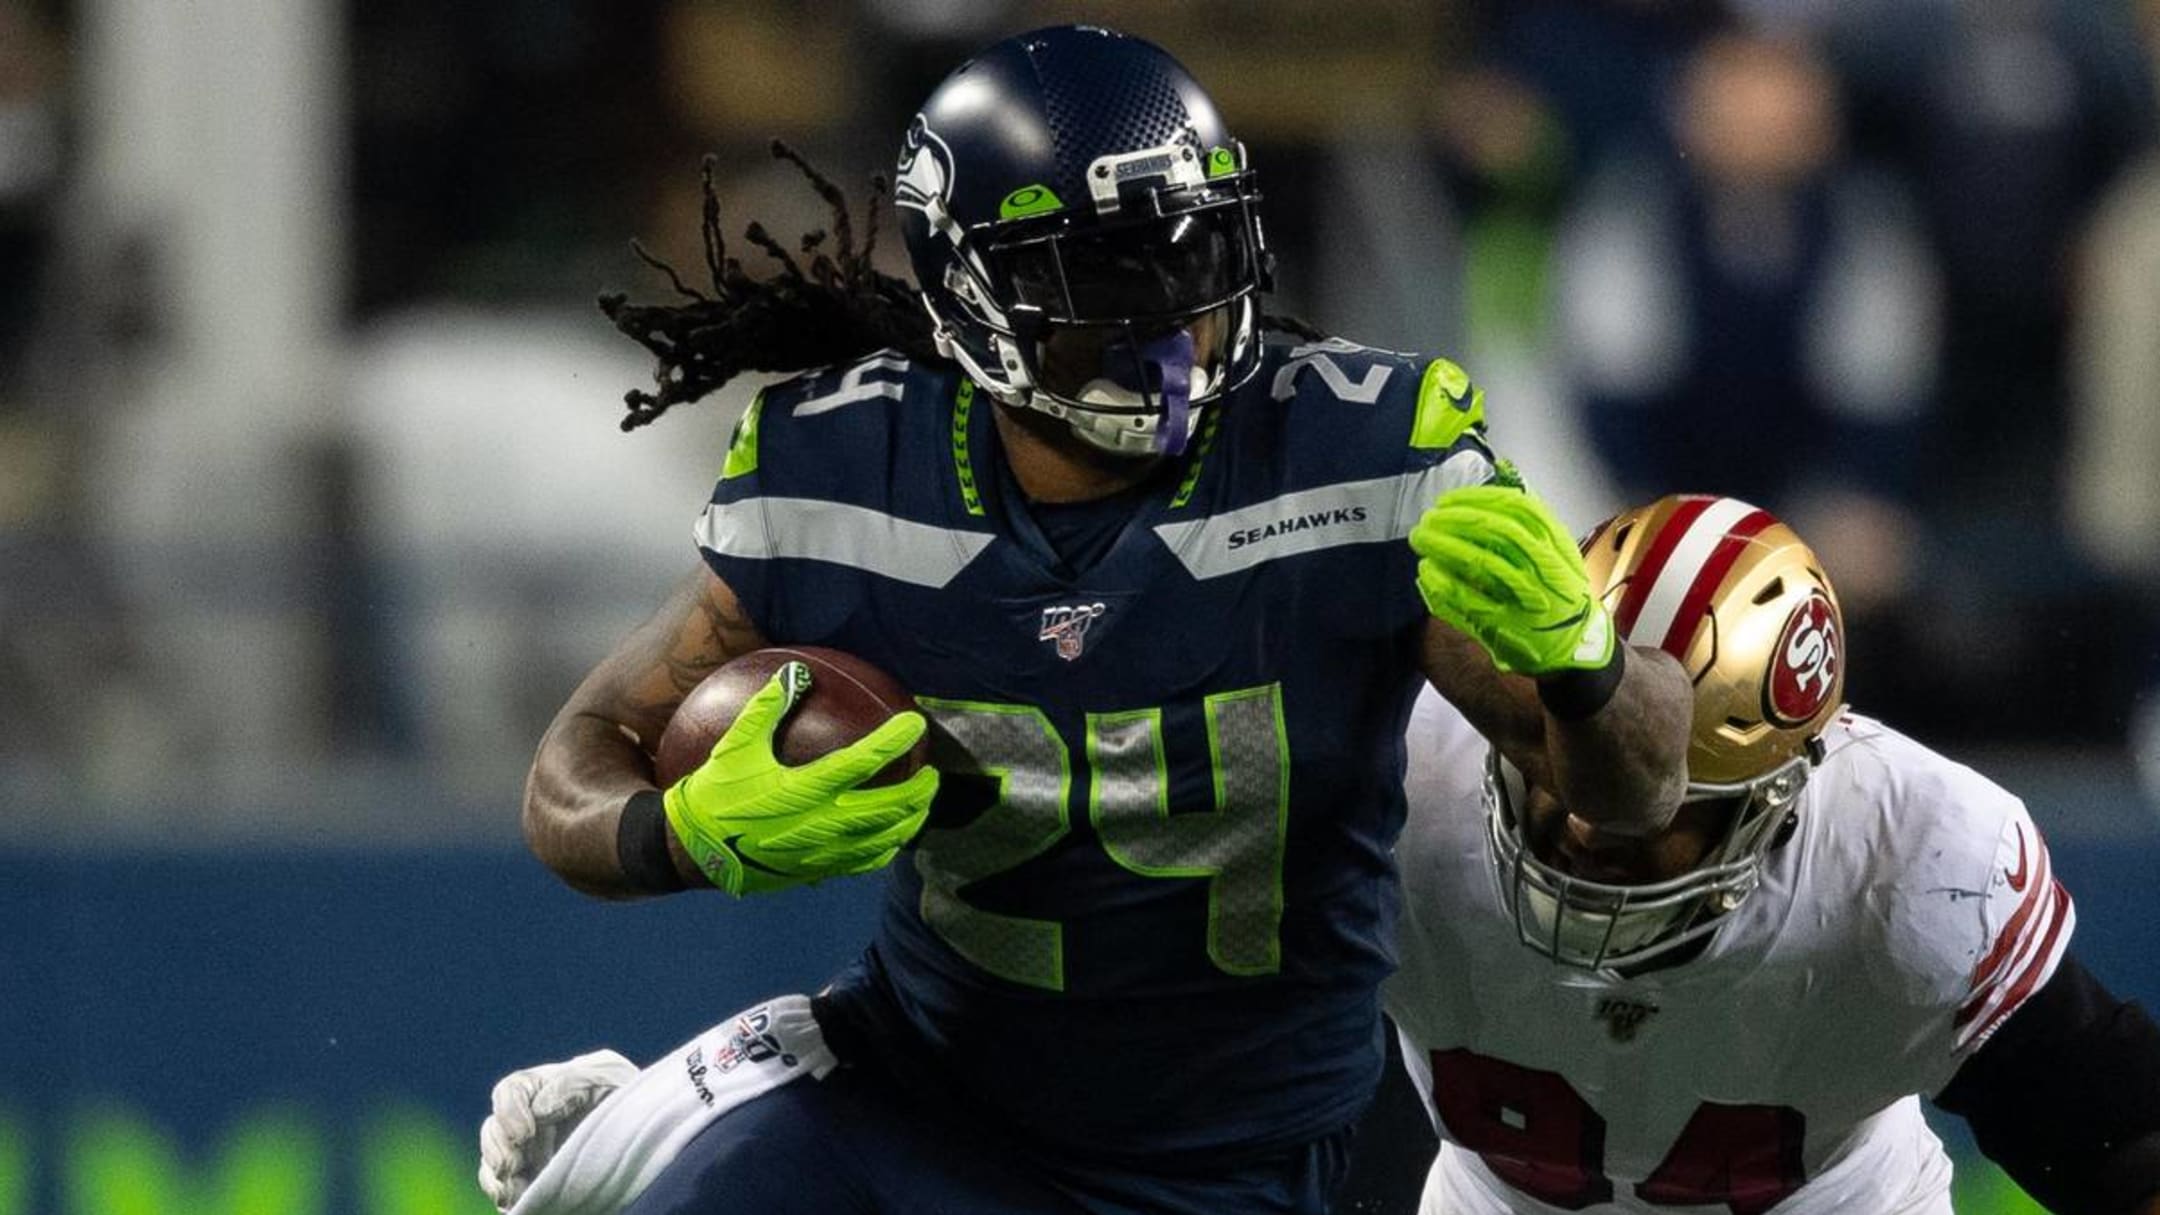 Marshawn Lynch drawing interest from NFL teams